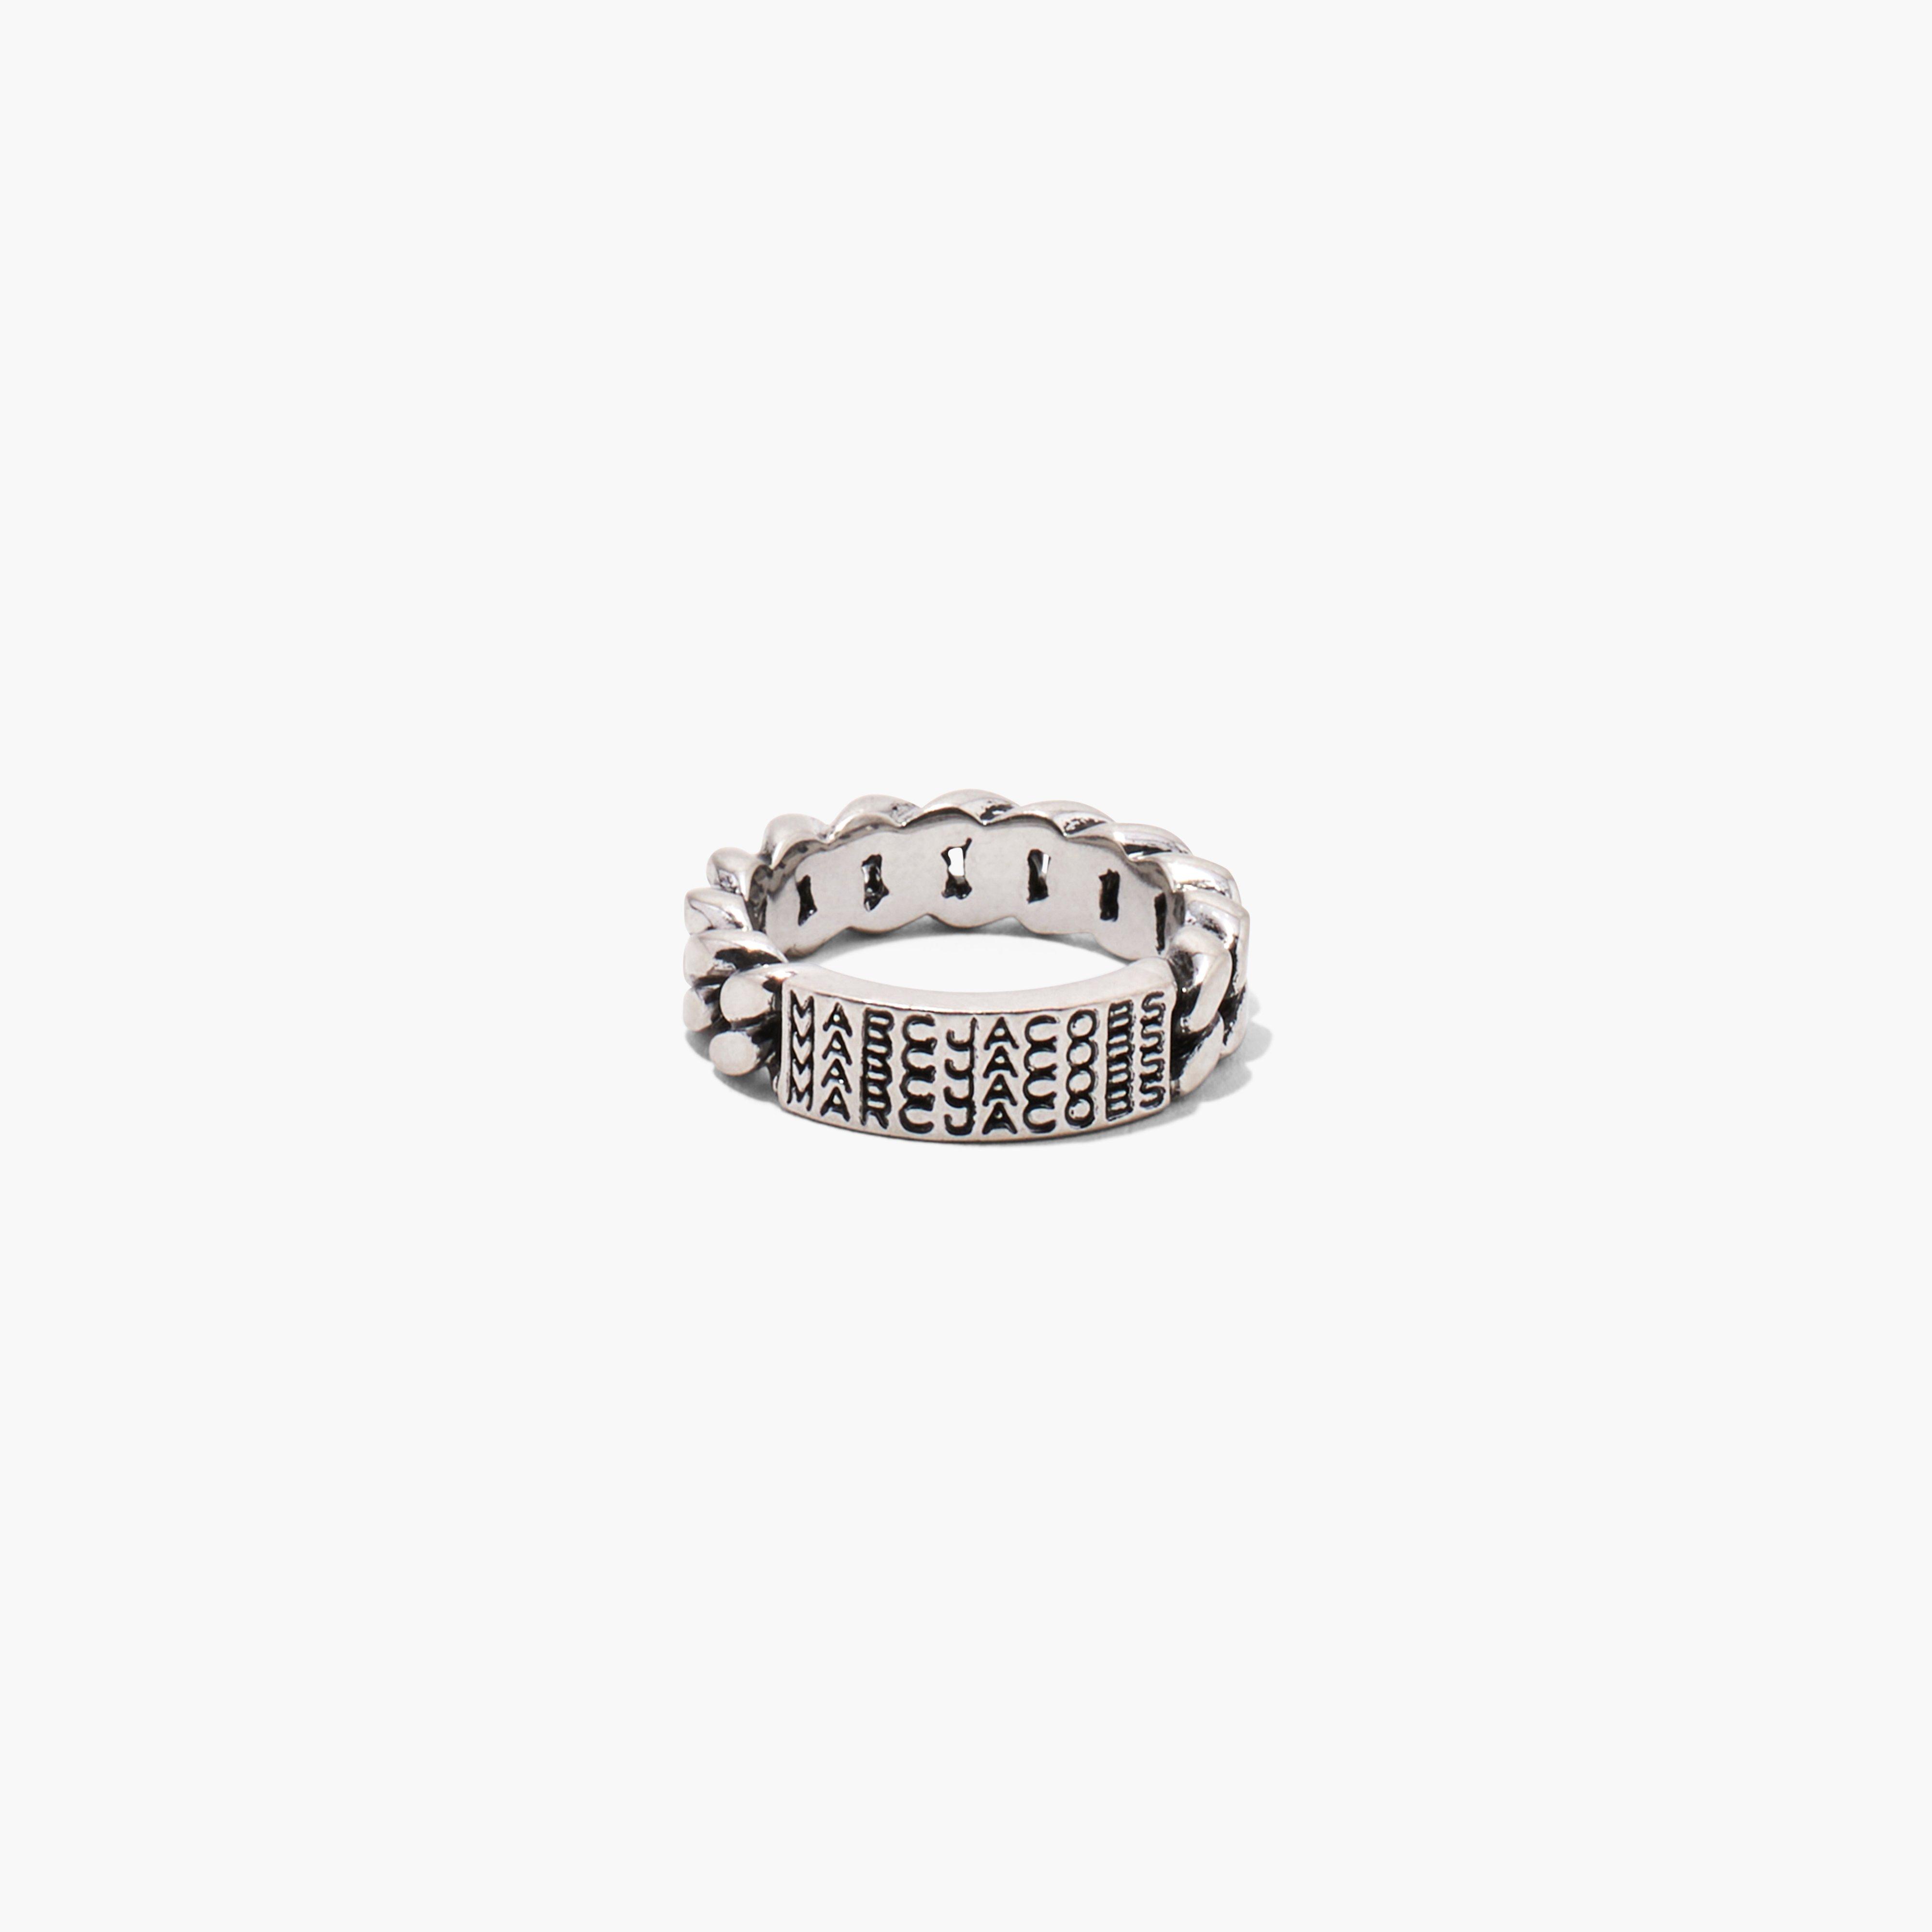 Marc by Marc jacobs The Barcode Monogram ID Chain Ring,AGED SILVER